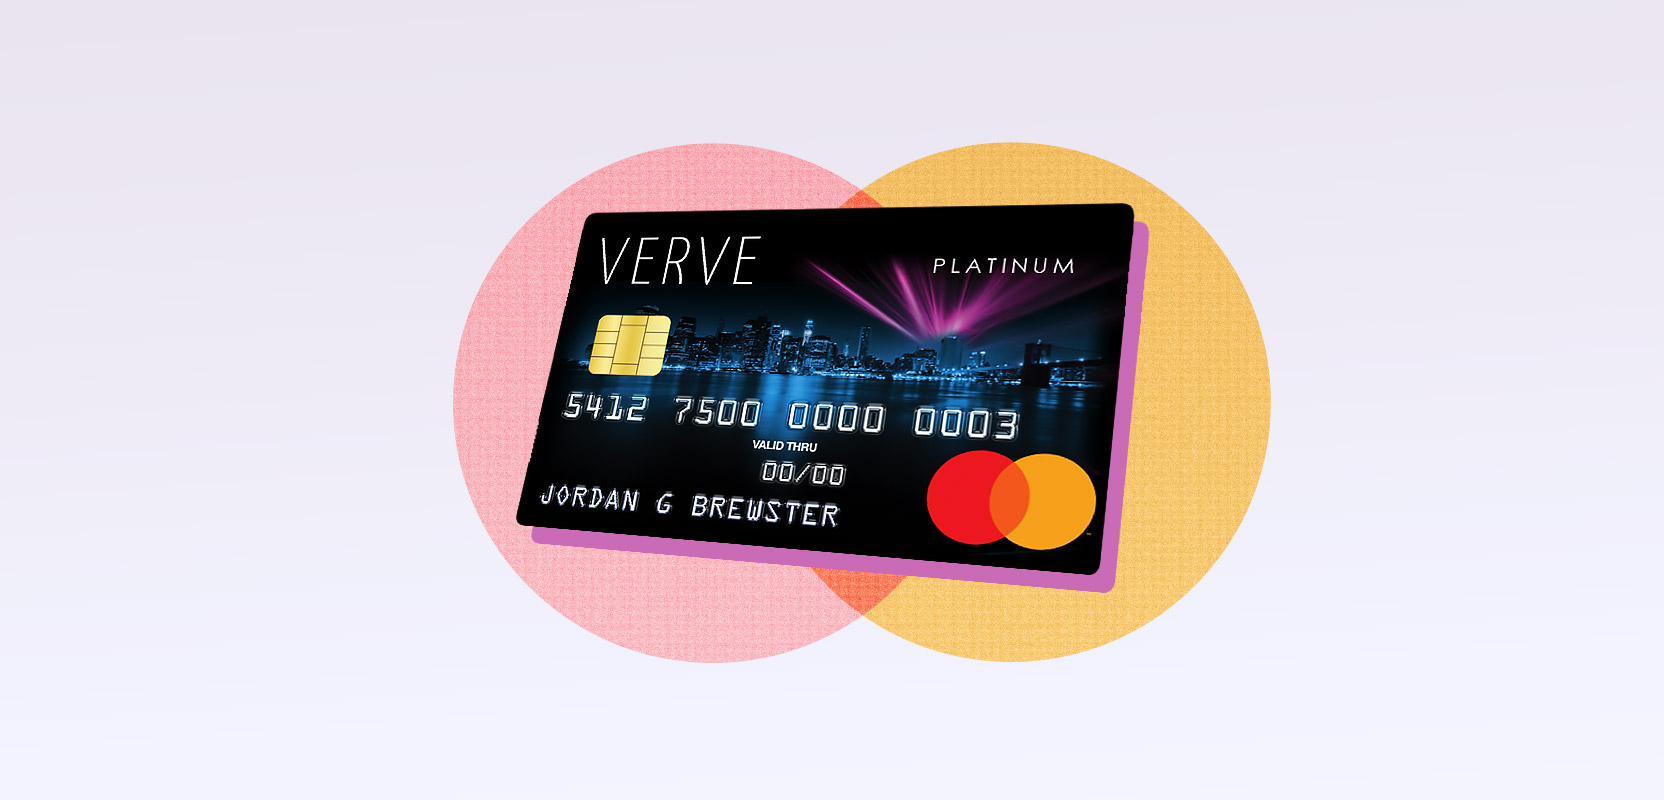 Verve Mastercard® Review: Not Worth the Cost